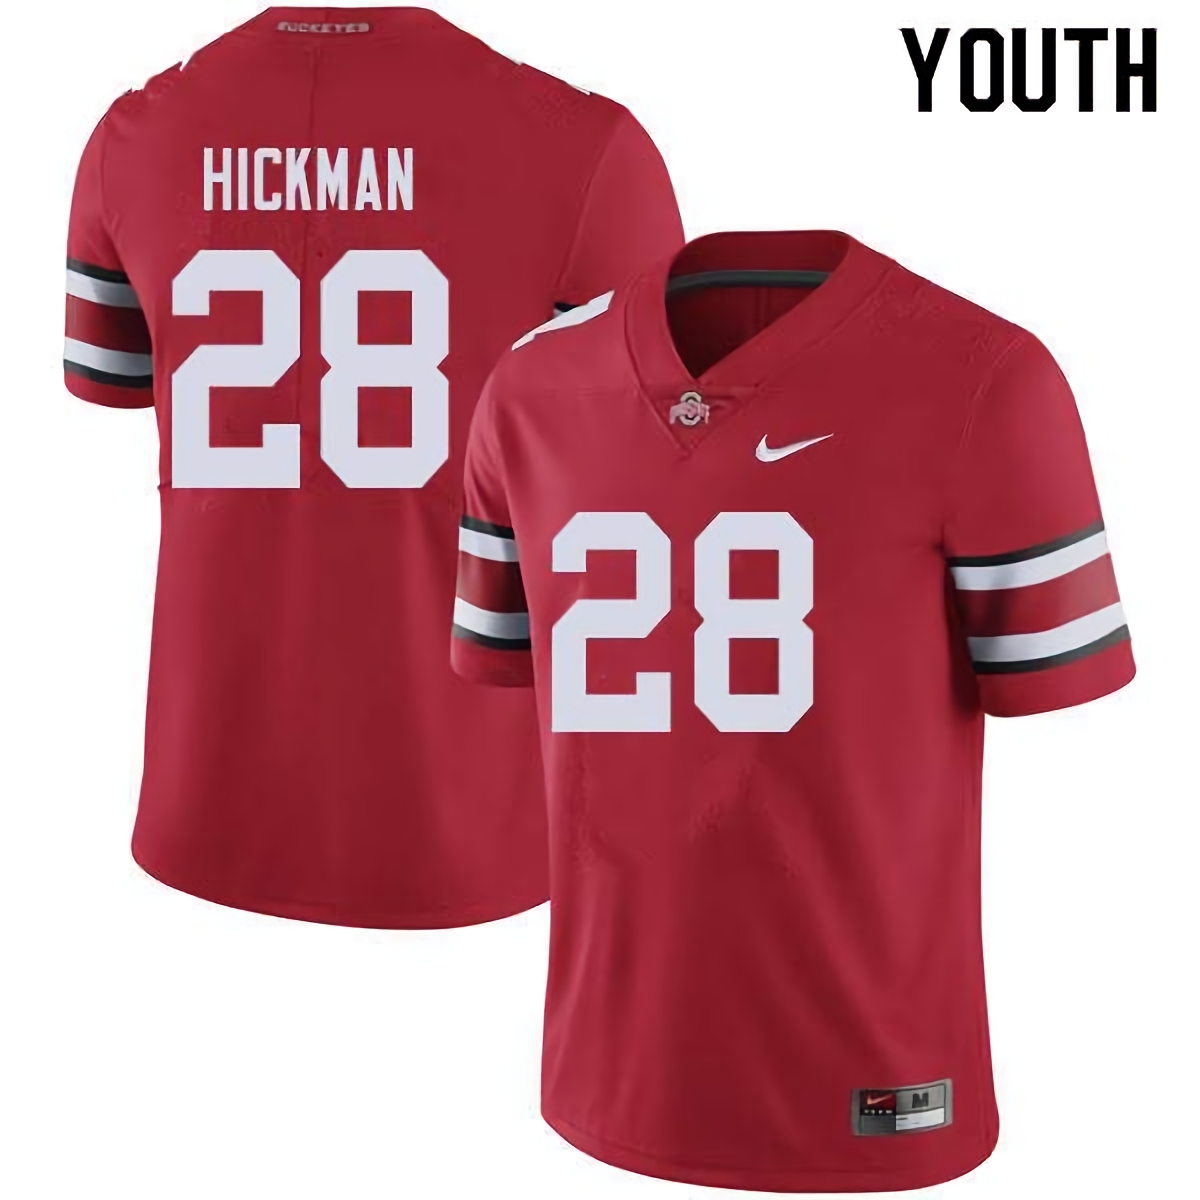 Ronnie Hickman Ohio State Buckeyes Youth NCAA #28 Nike Red College Stitched Football Jersey JOB7856OK